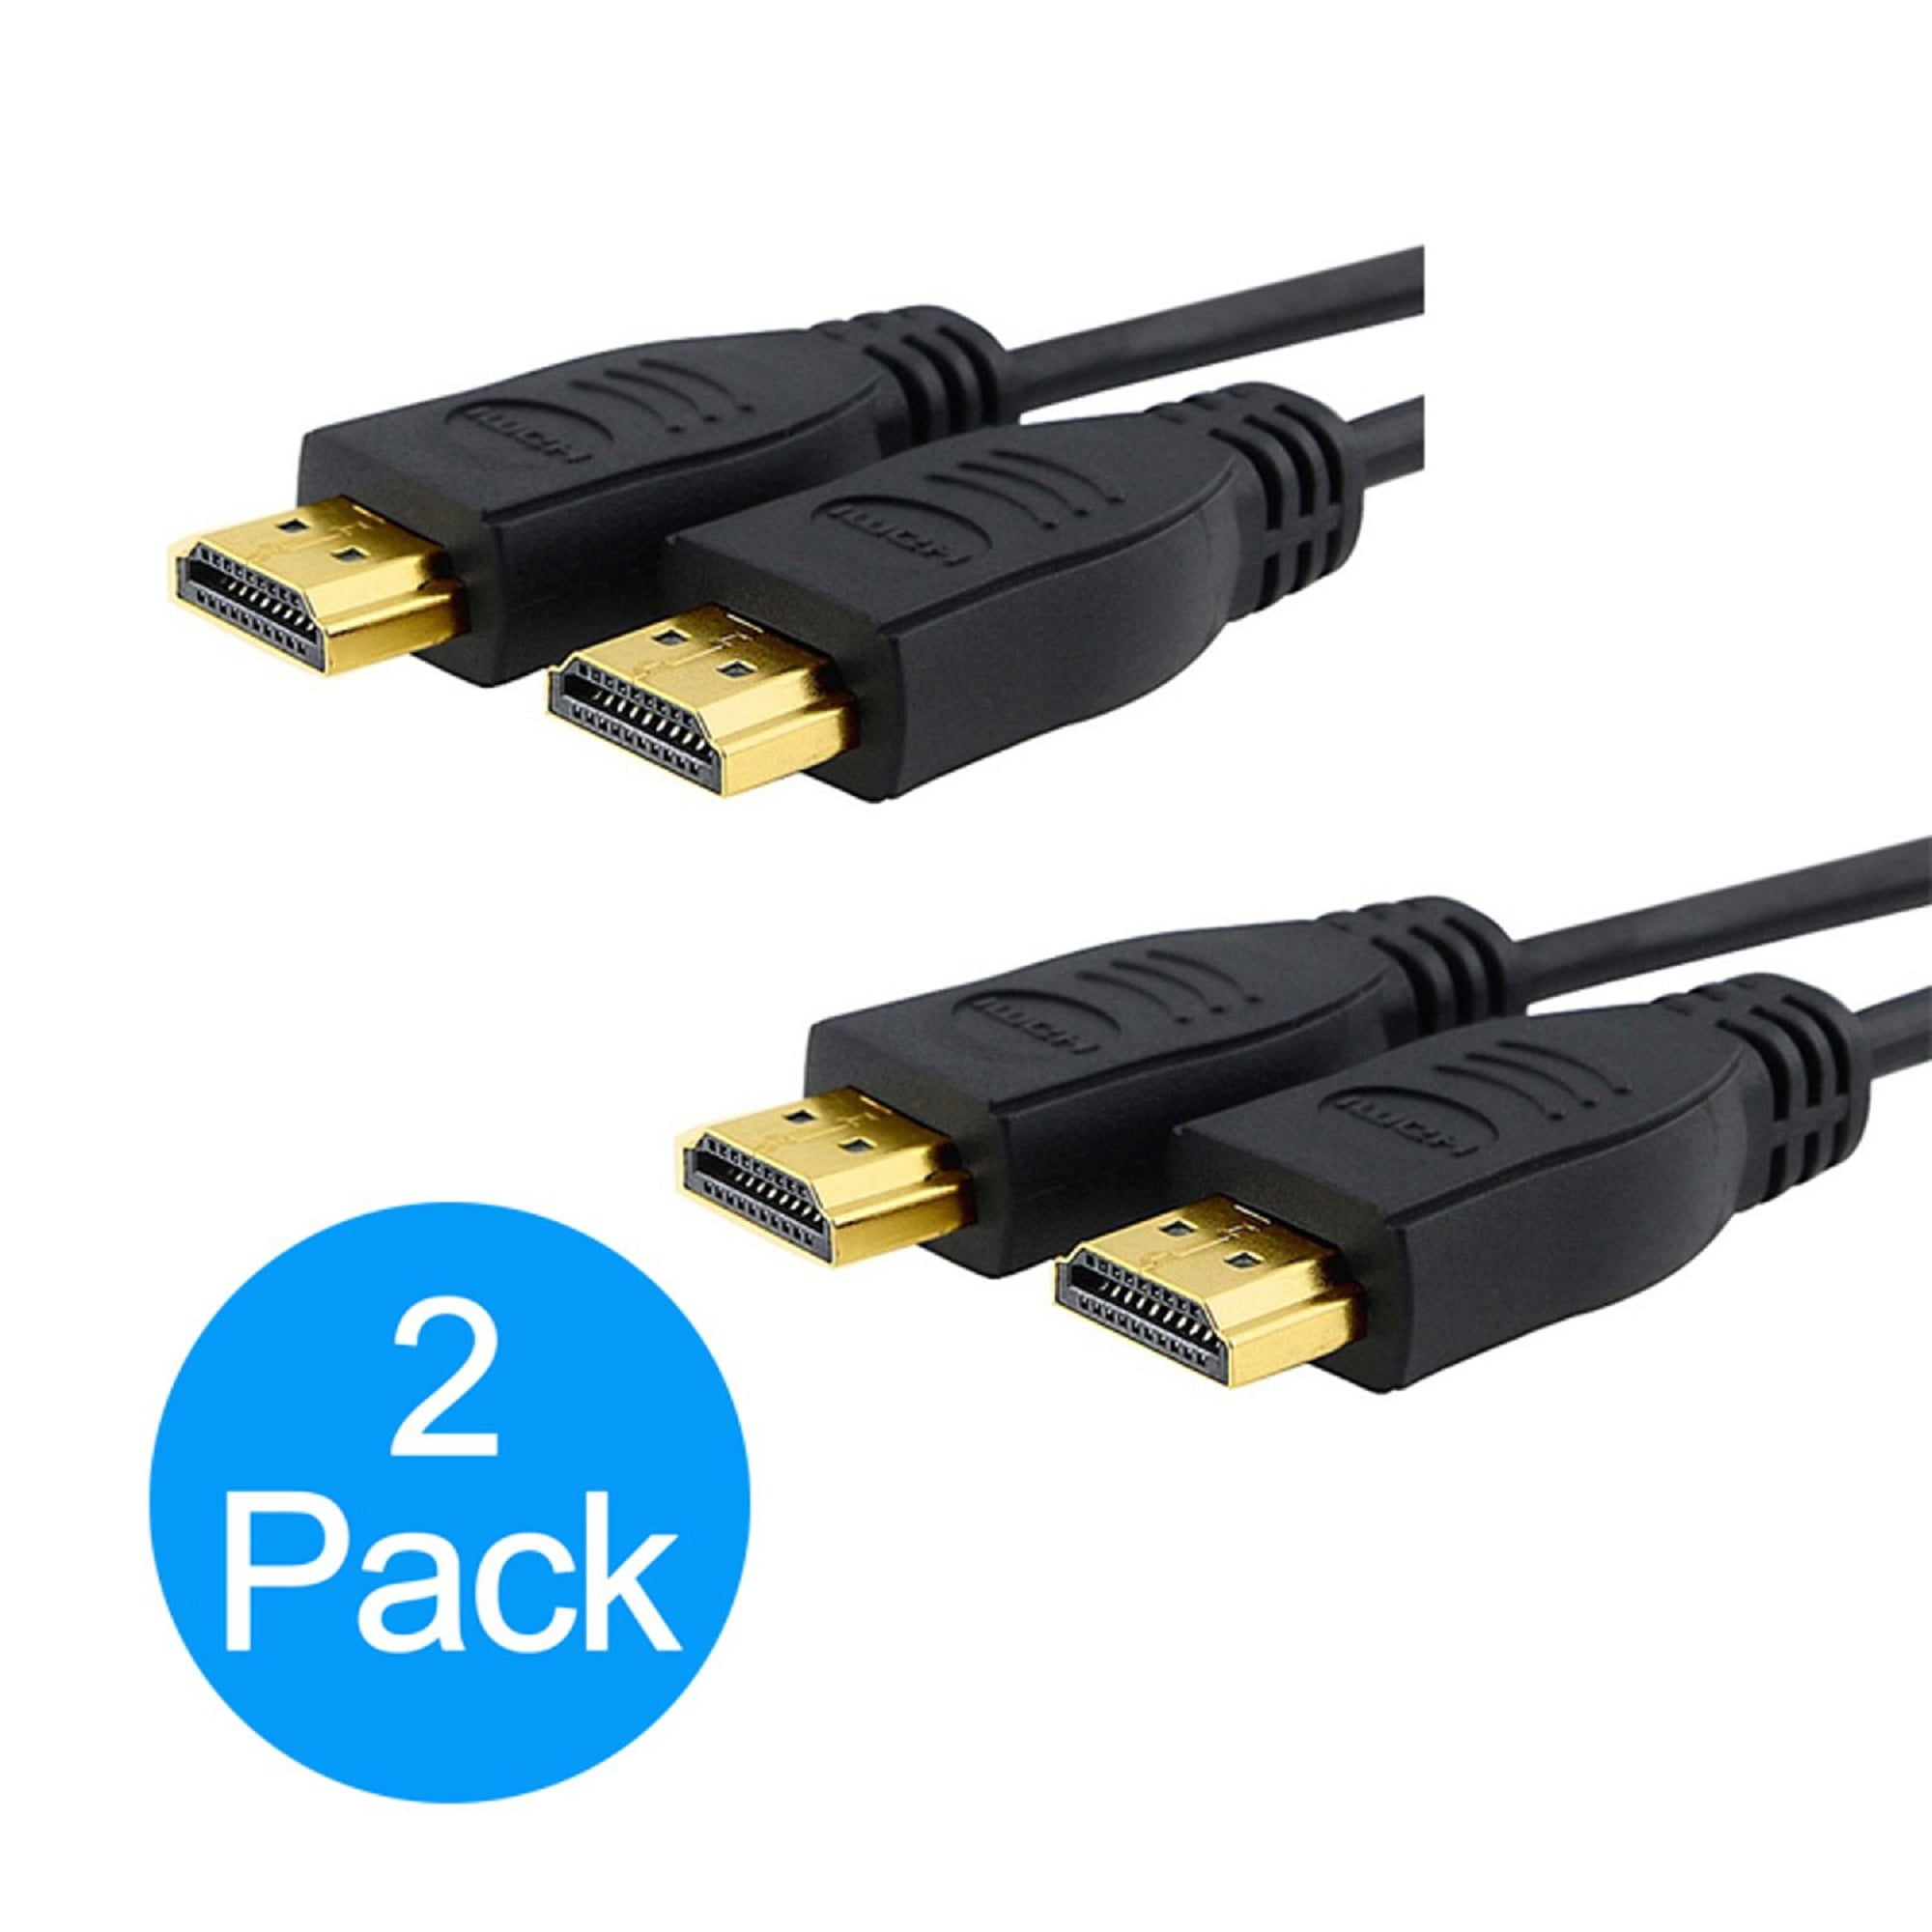 HDMI Cable Premium High Speed v2.0 Extra Long Lead 4K Ultra HD 3DTV 2160P 1080P 